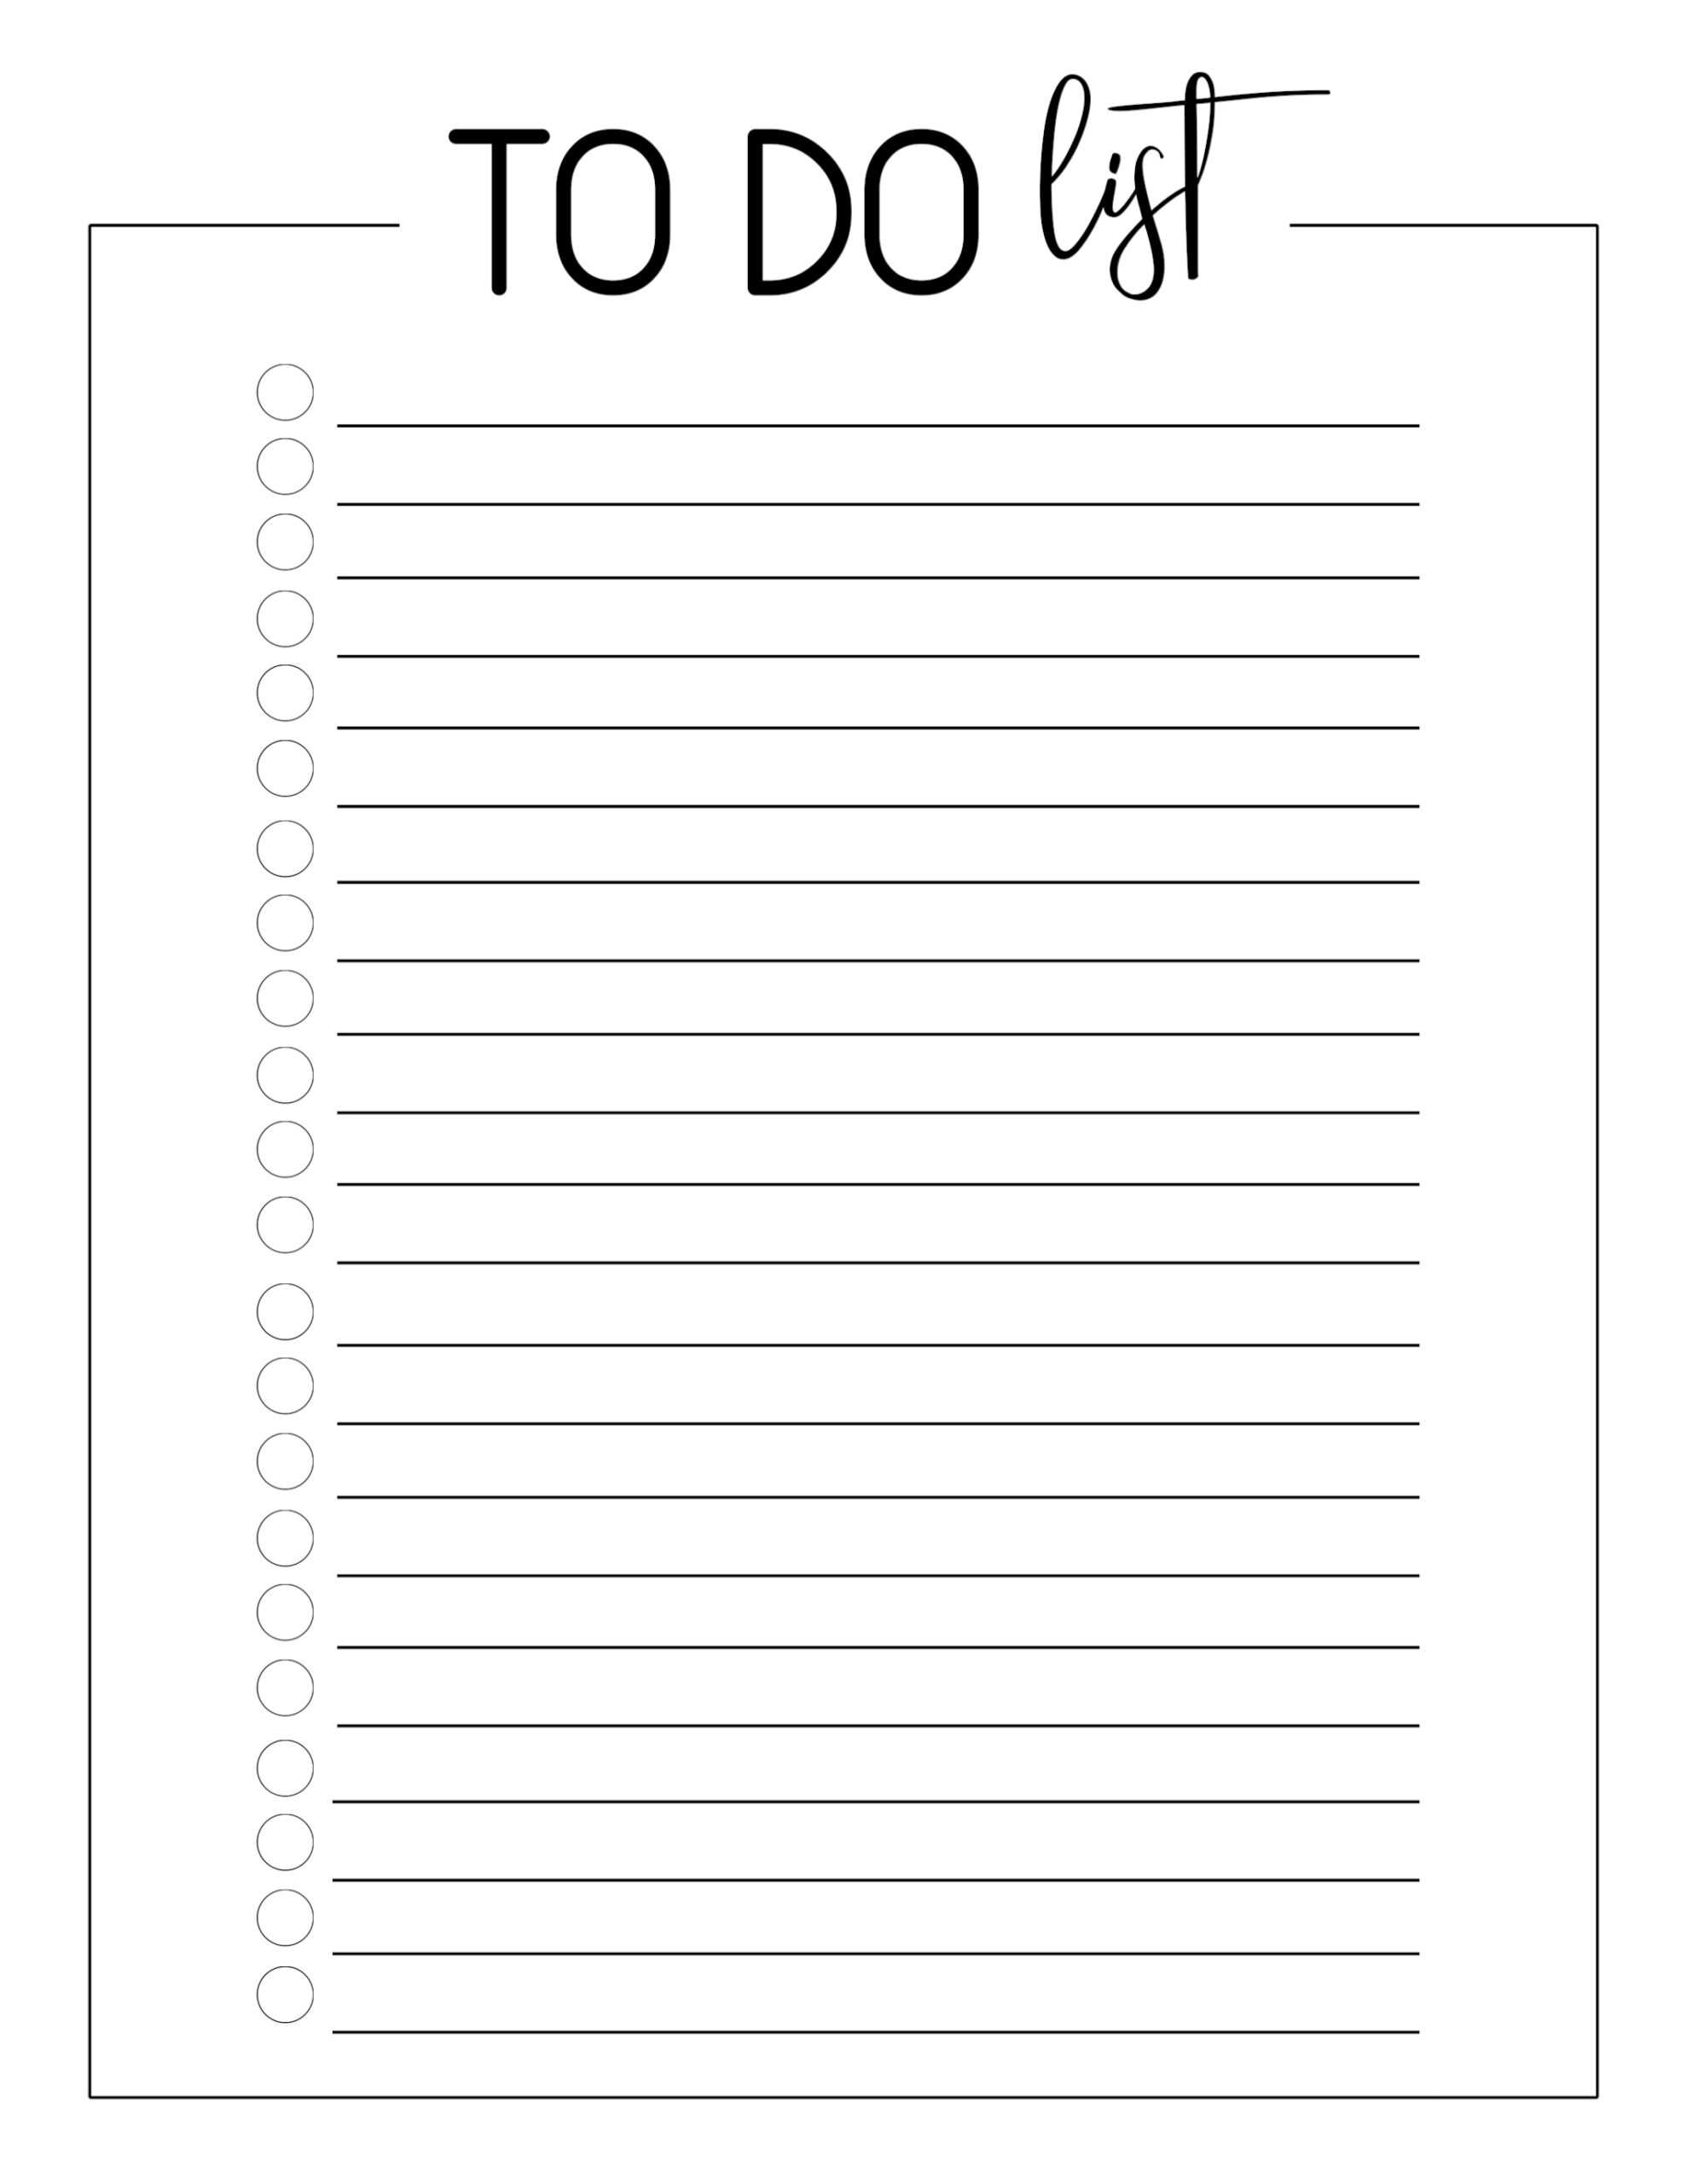 3Cf515 Blank Checklist Templates | Wiring Library Intended For Blank To Do List Template